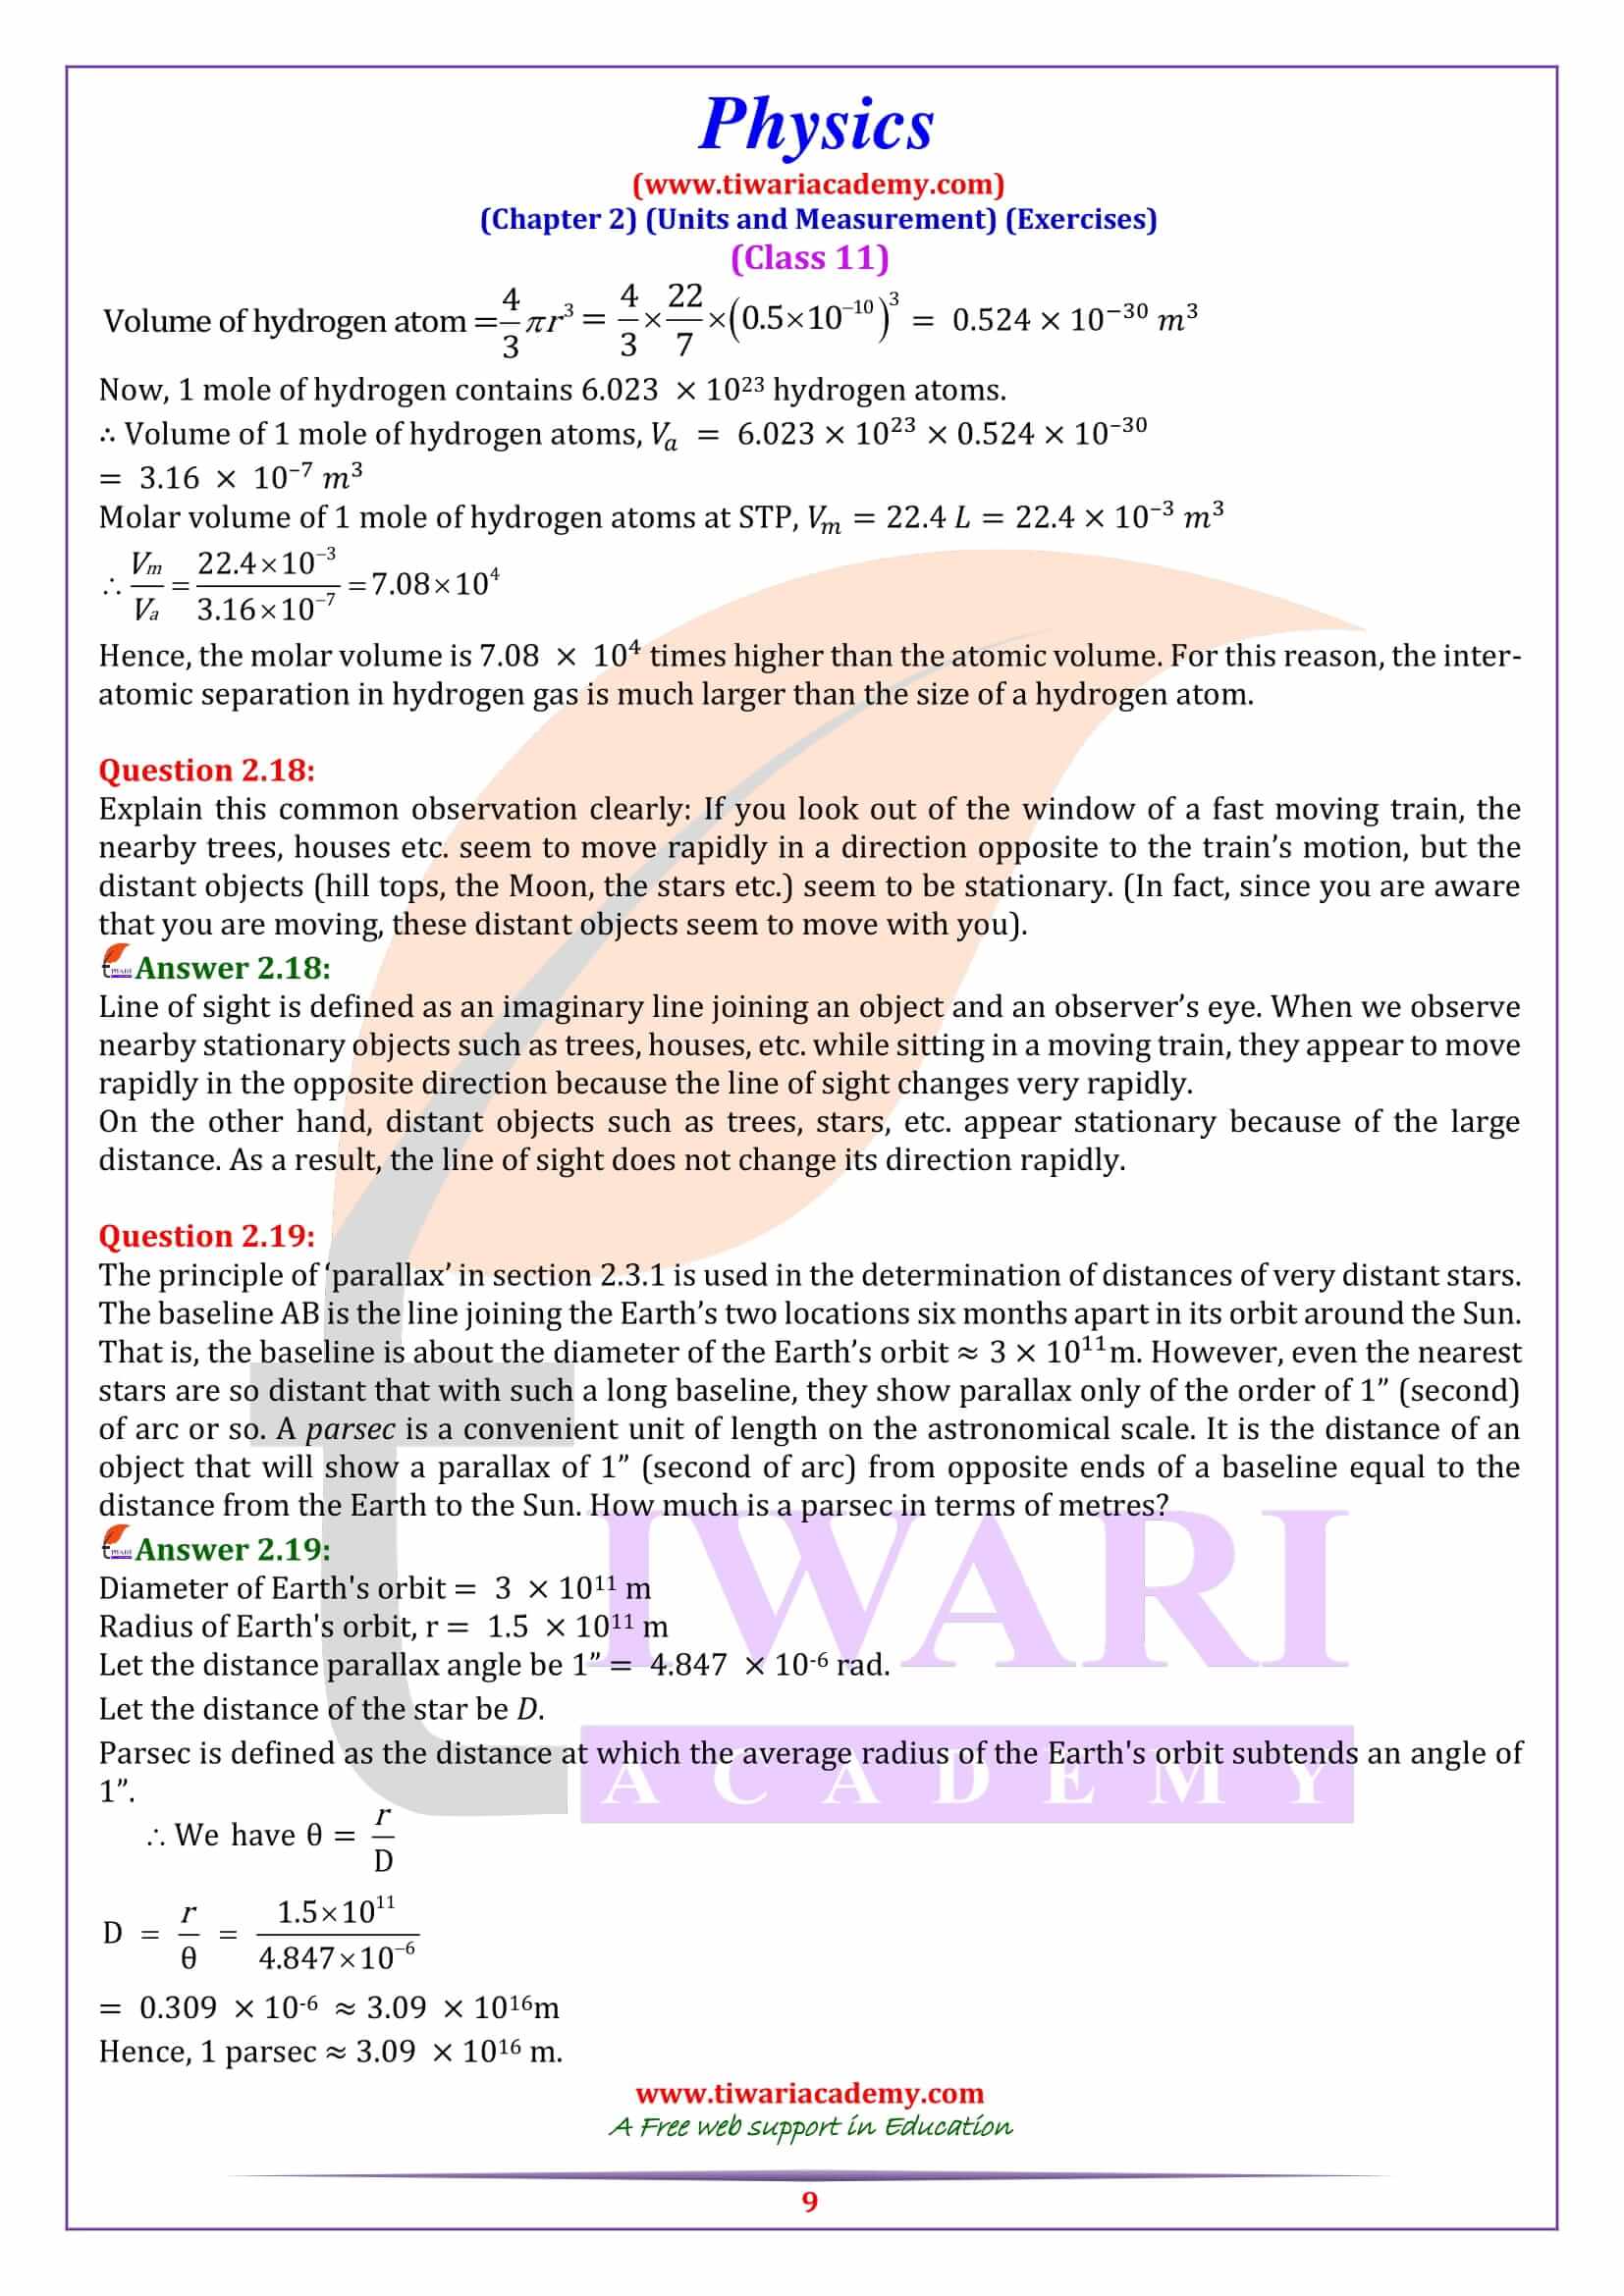 Class 11 Physics Chapter 2 ncert answers